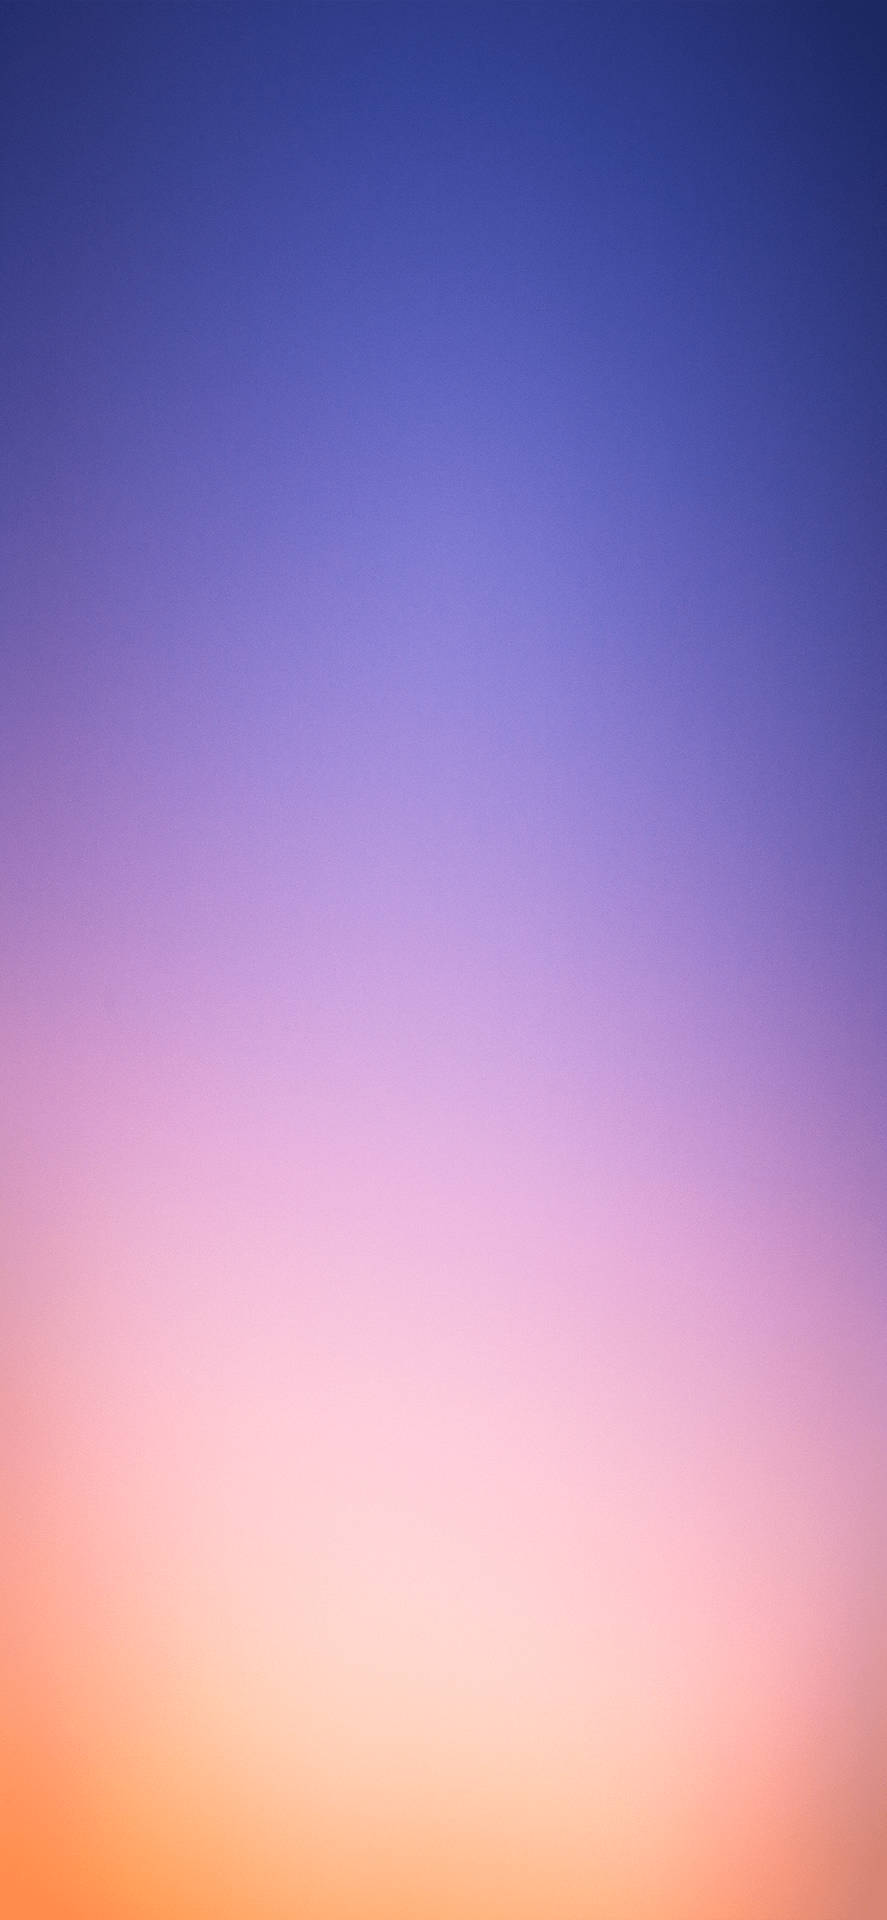 121 Iphone X Wallpapers & Backgrounds